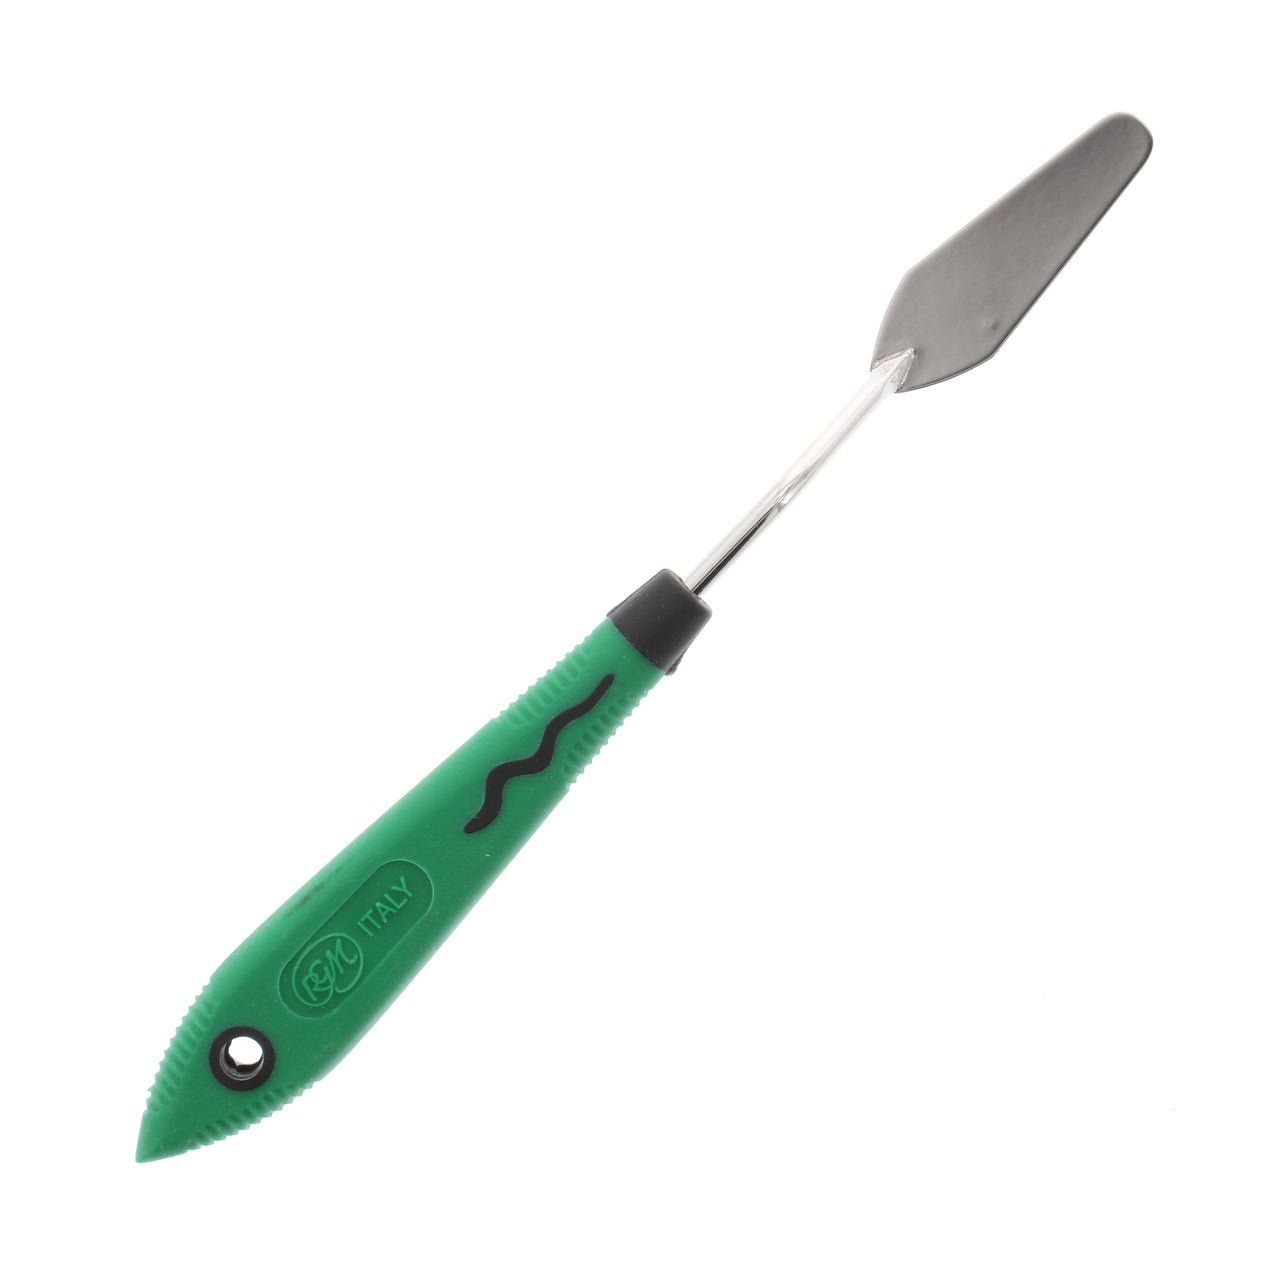 RGM Soft Grip Painting Knife #003 (Green Handle)